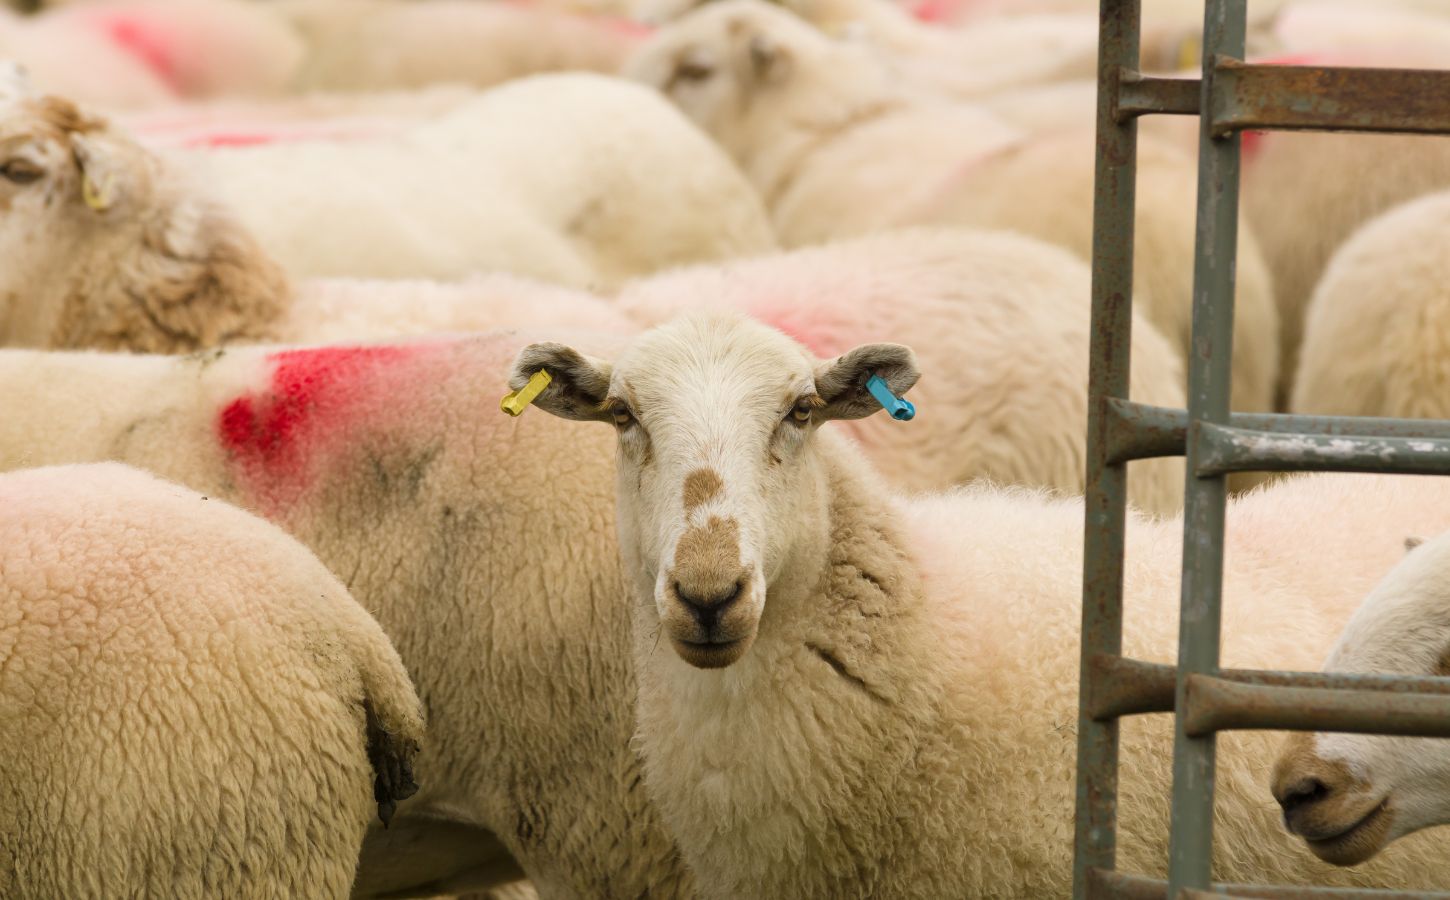 A group of sheep in a live export ship